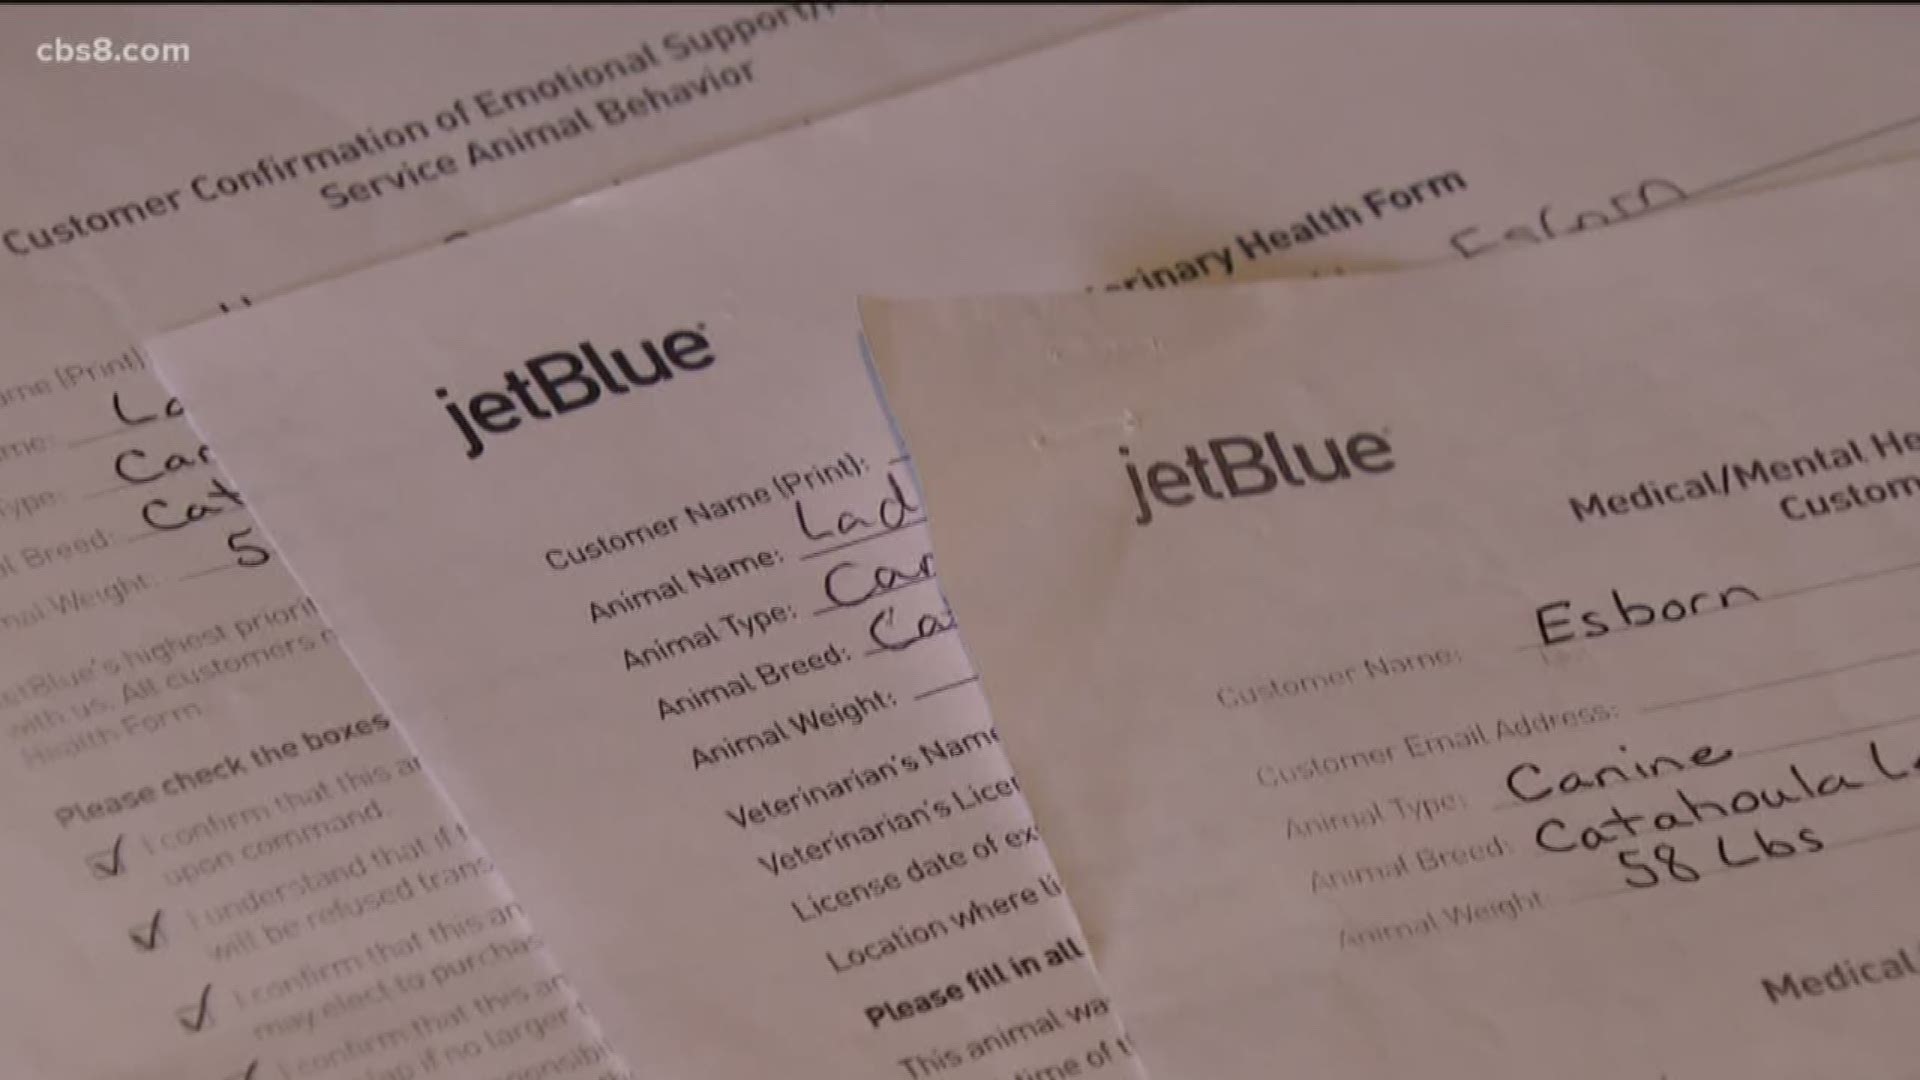 Veteran turned away from JetBlue flight due to lack of service dog  documents 